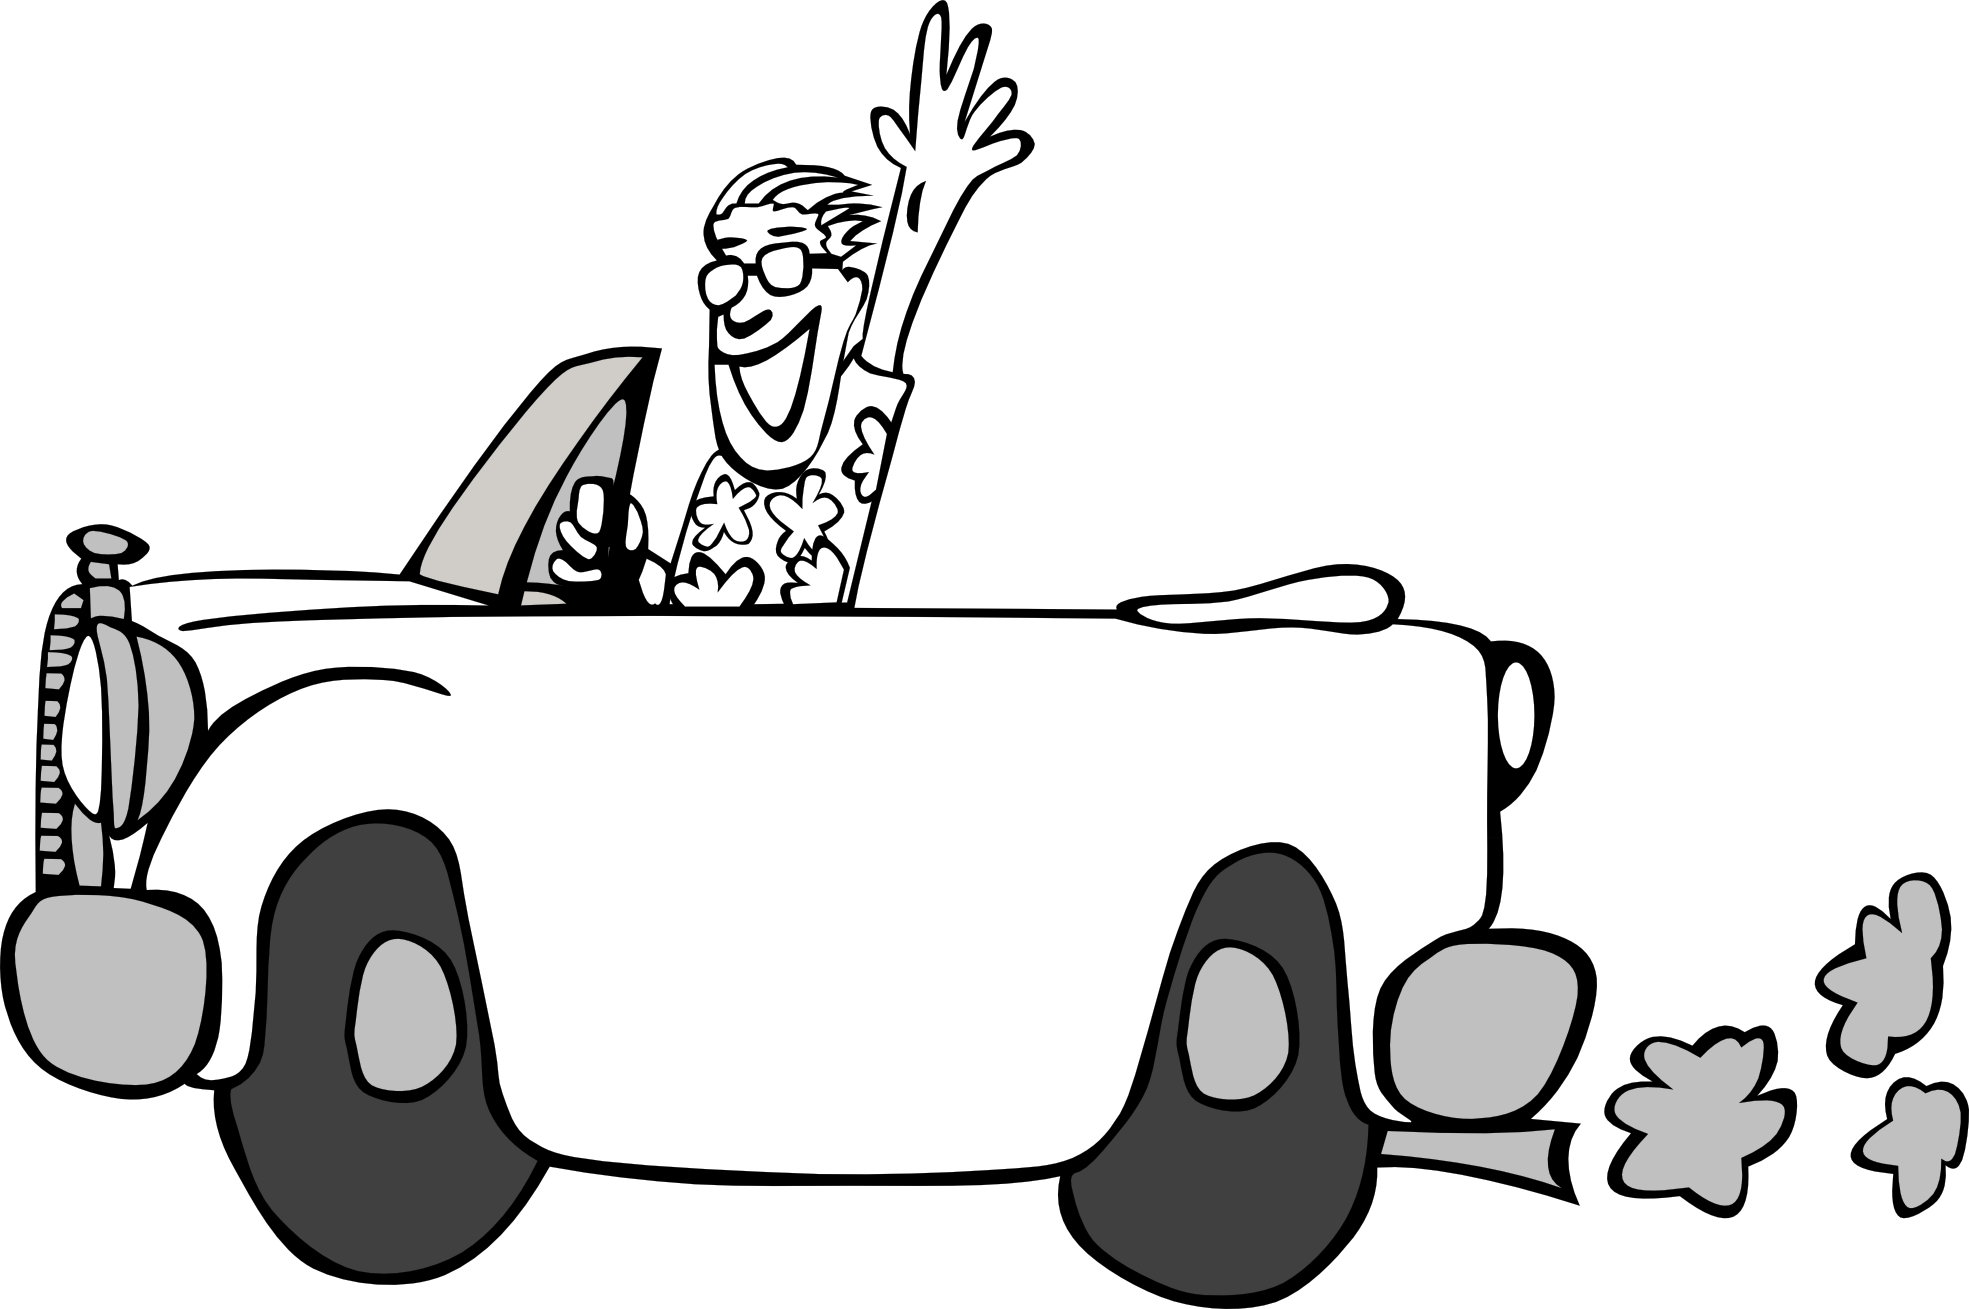 Ice clipart black and white. Guy speeding in car